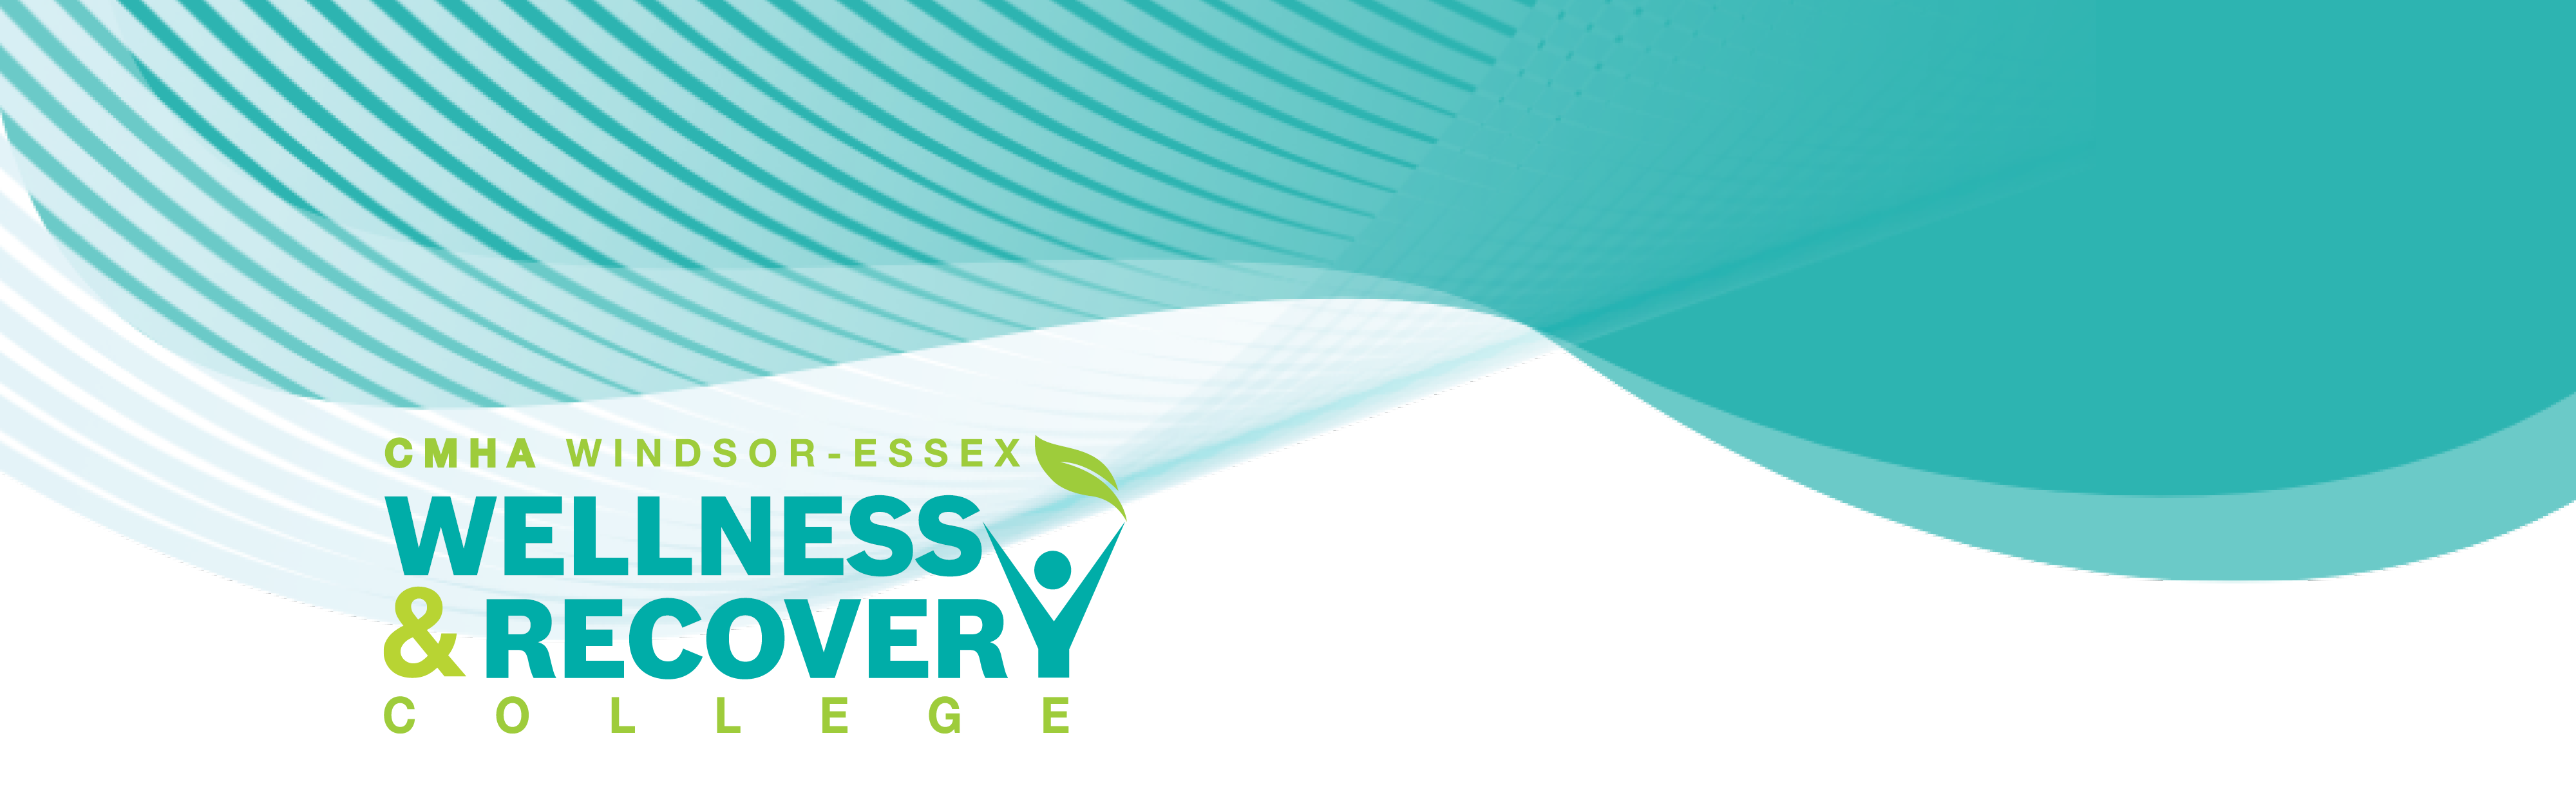 WELLNESS & RECOVERY COLLEGE: Introduction to Wellness